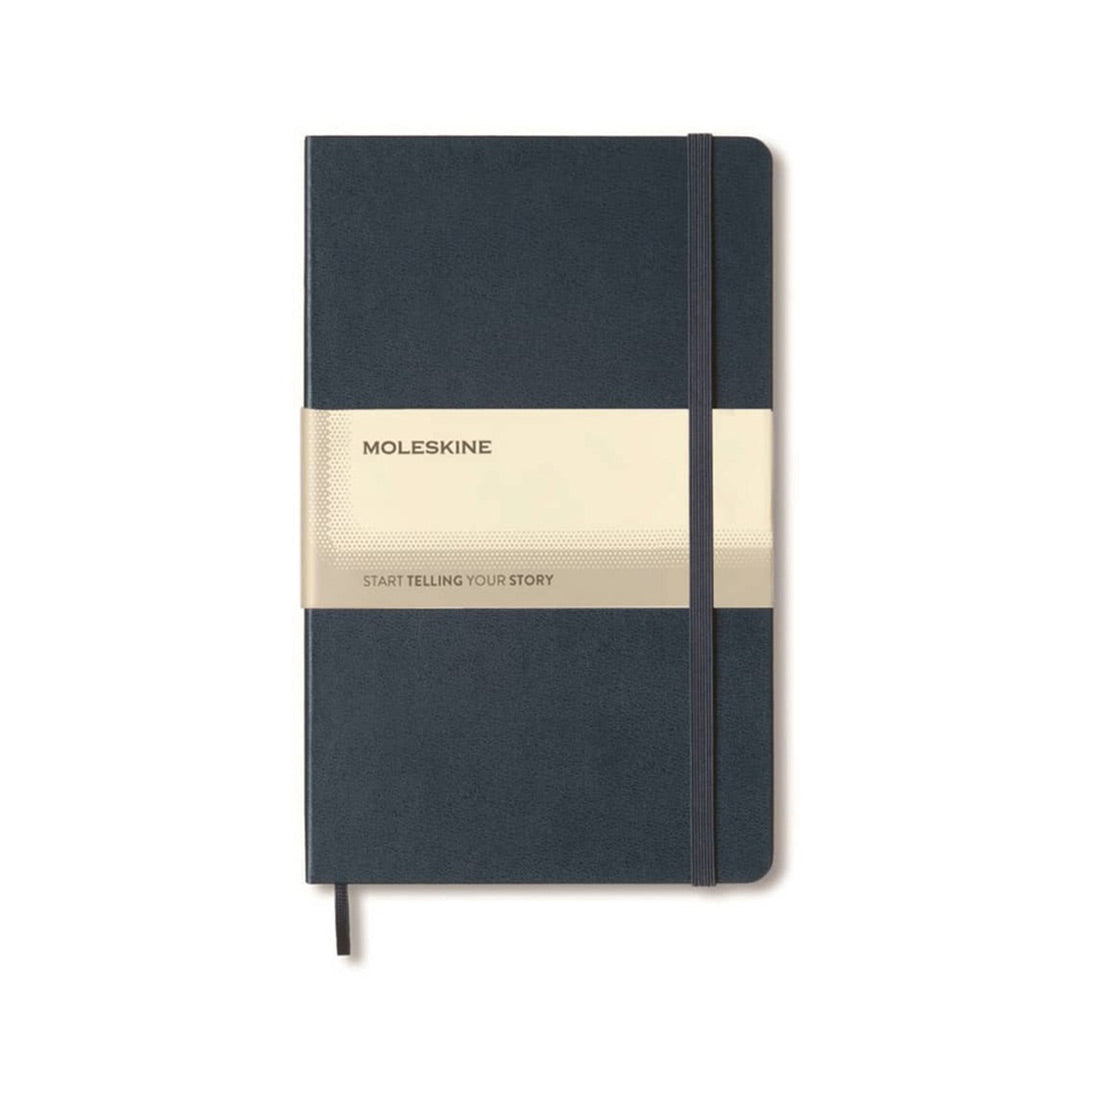 Moleskine Large Soft Cover Ruled Notebook Sapphire Blue